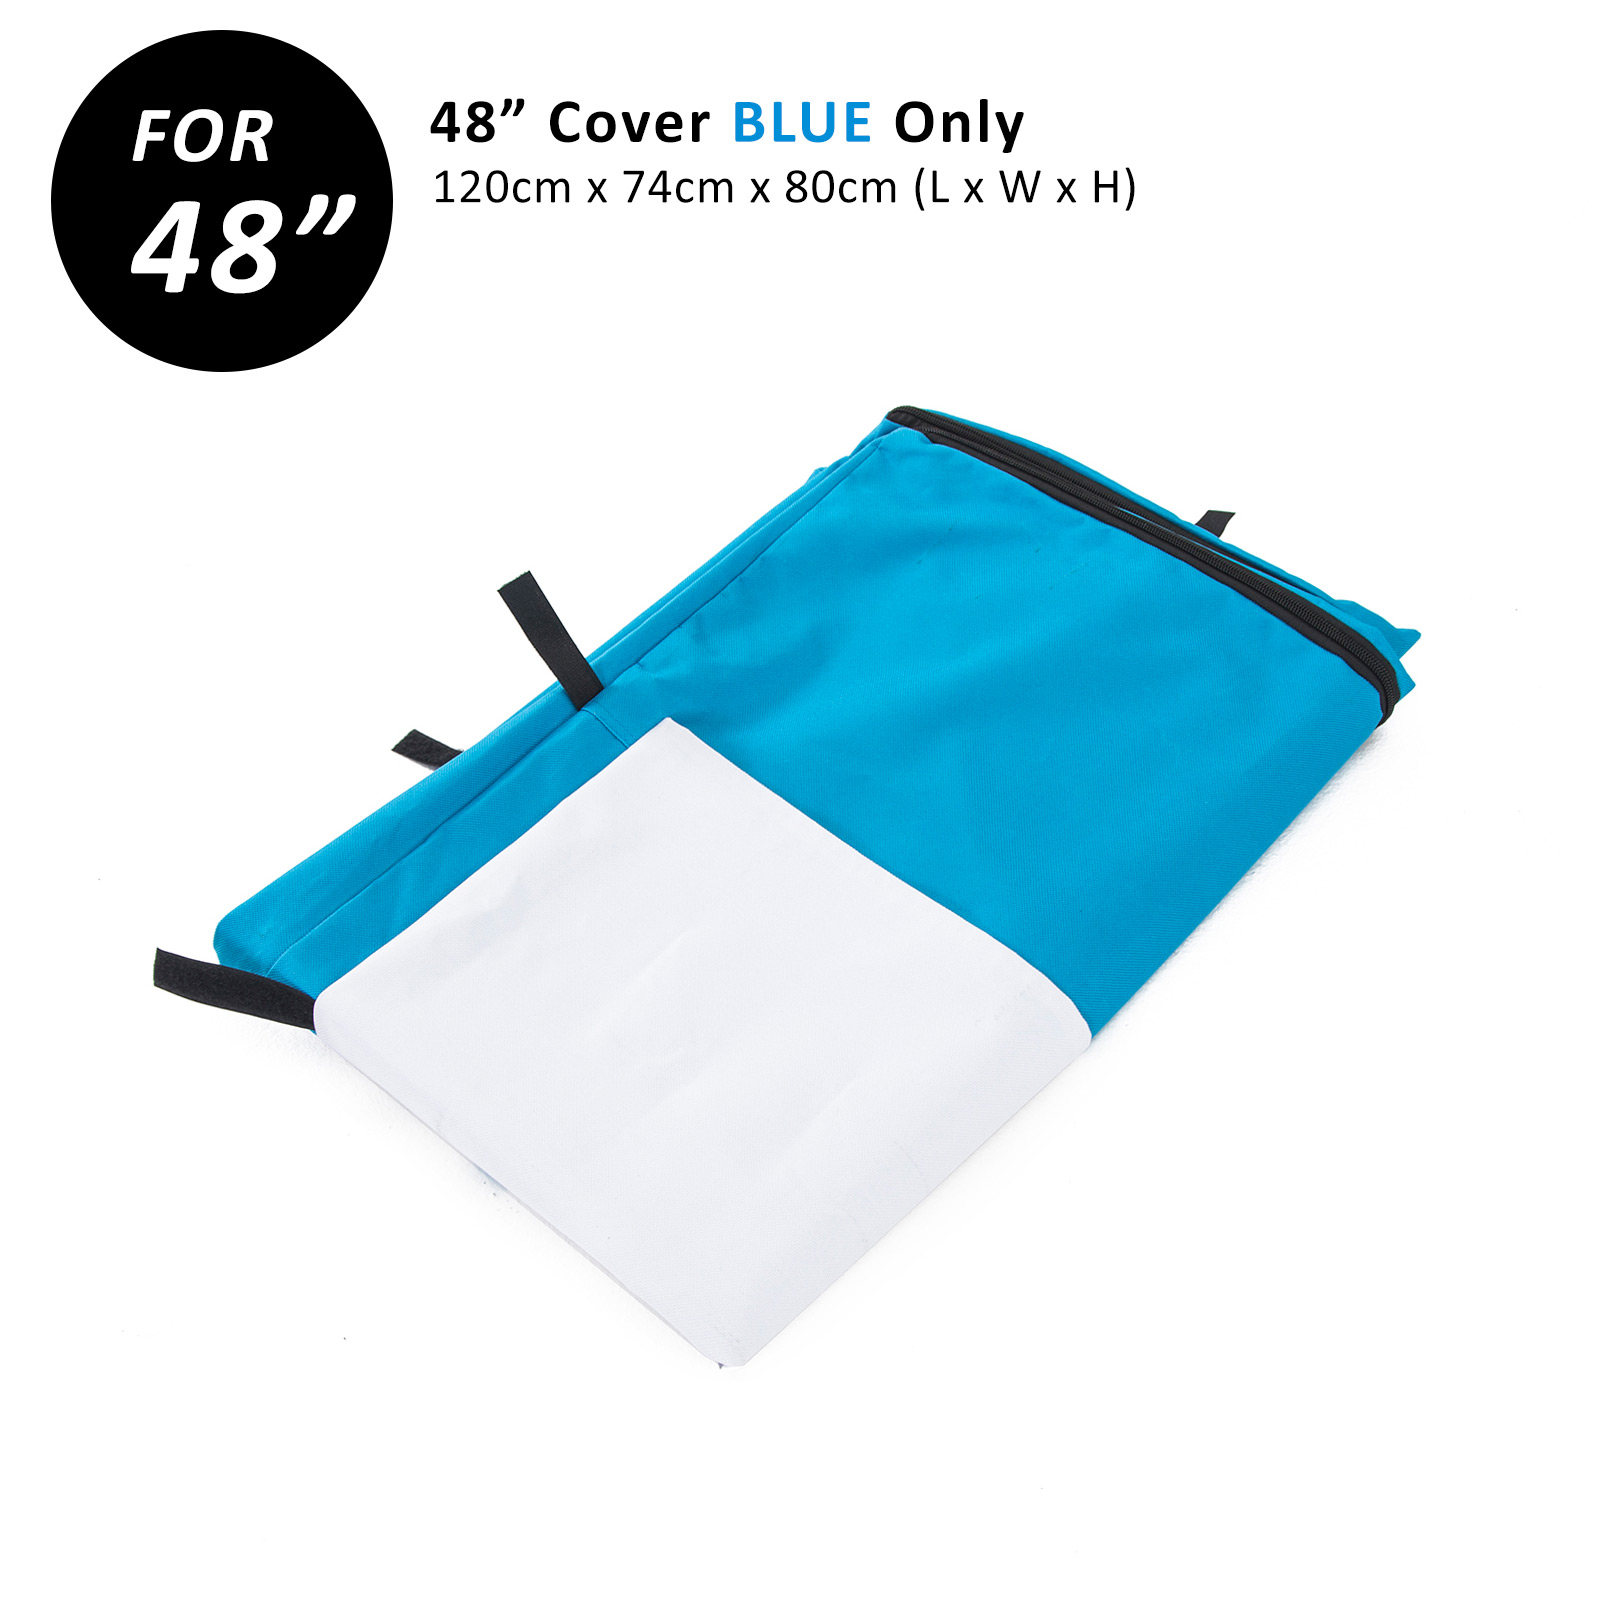 48in Cover for Wire Dog Cage - BLUE